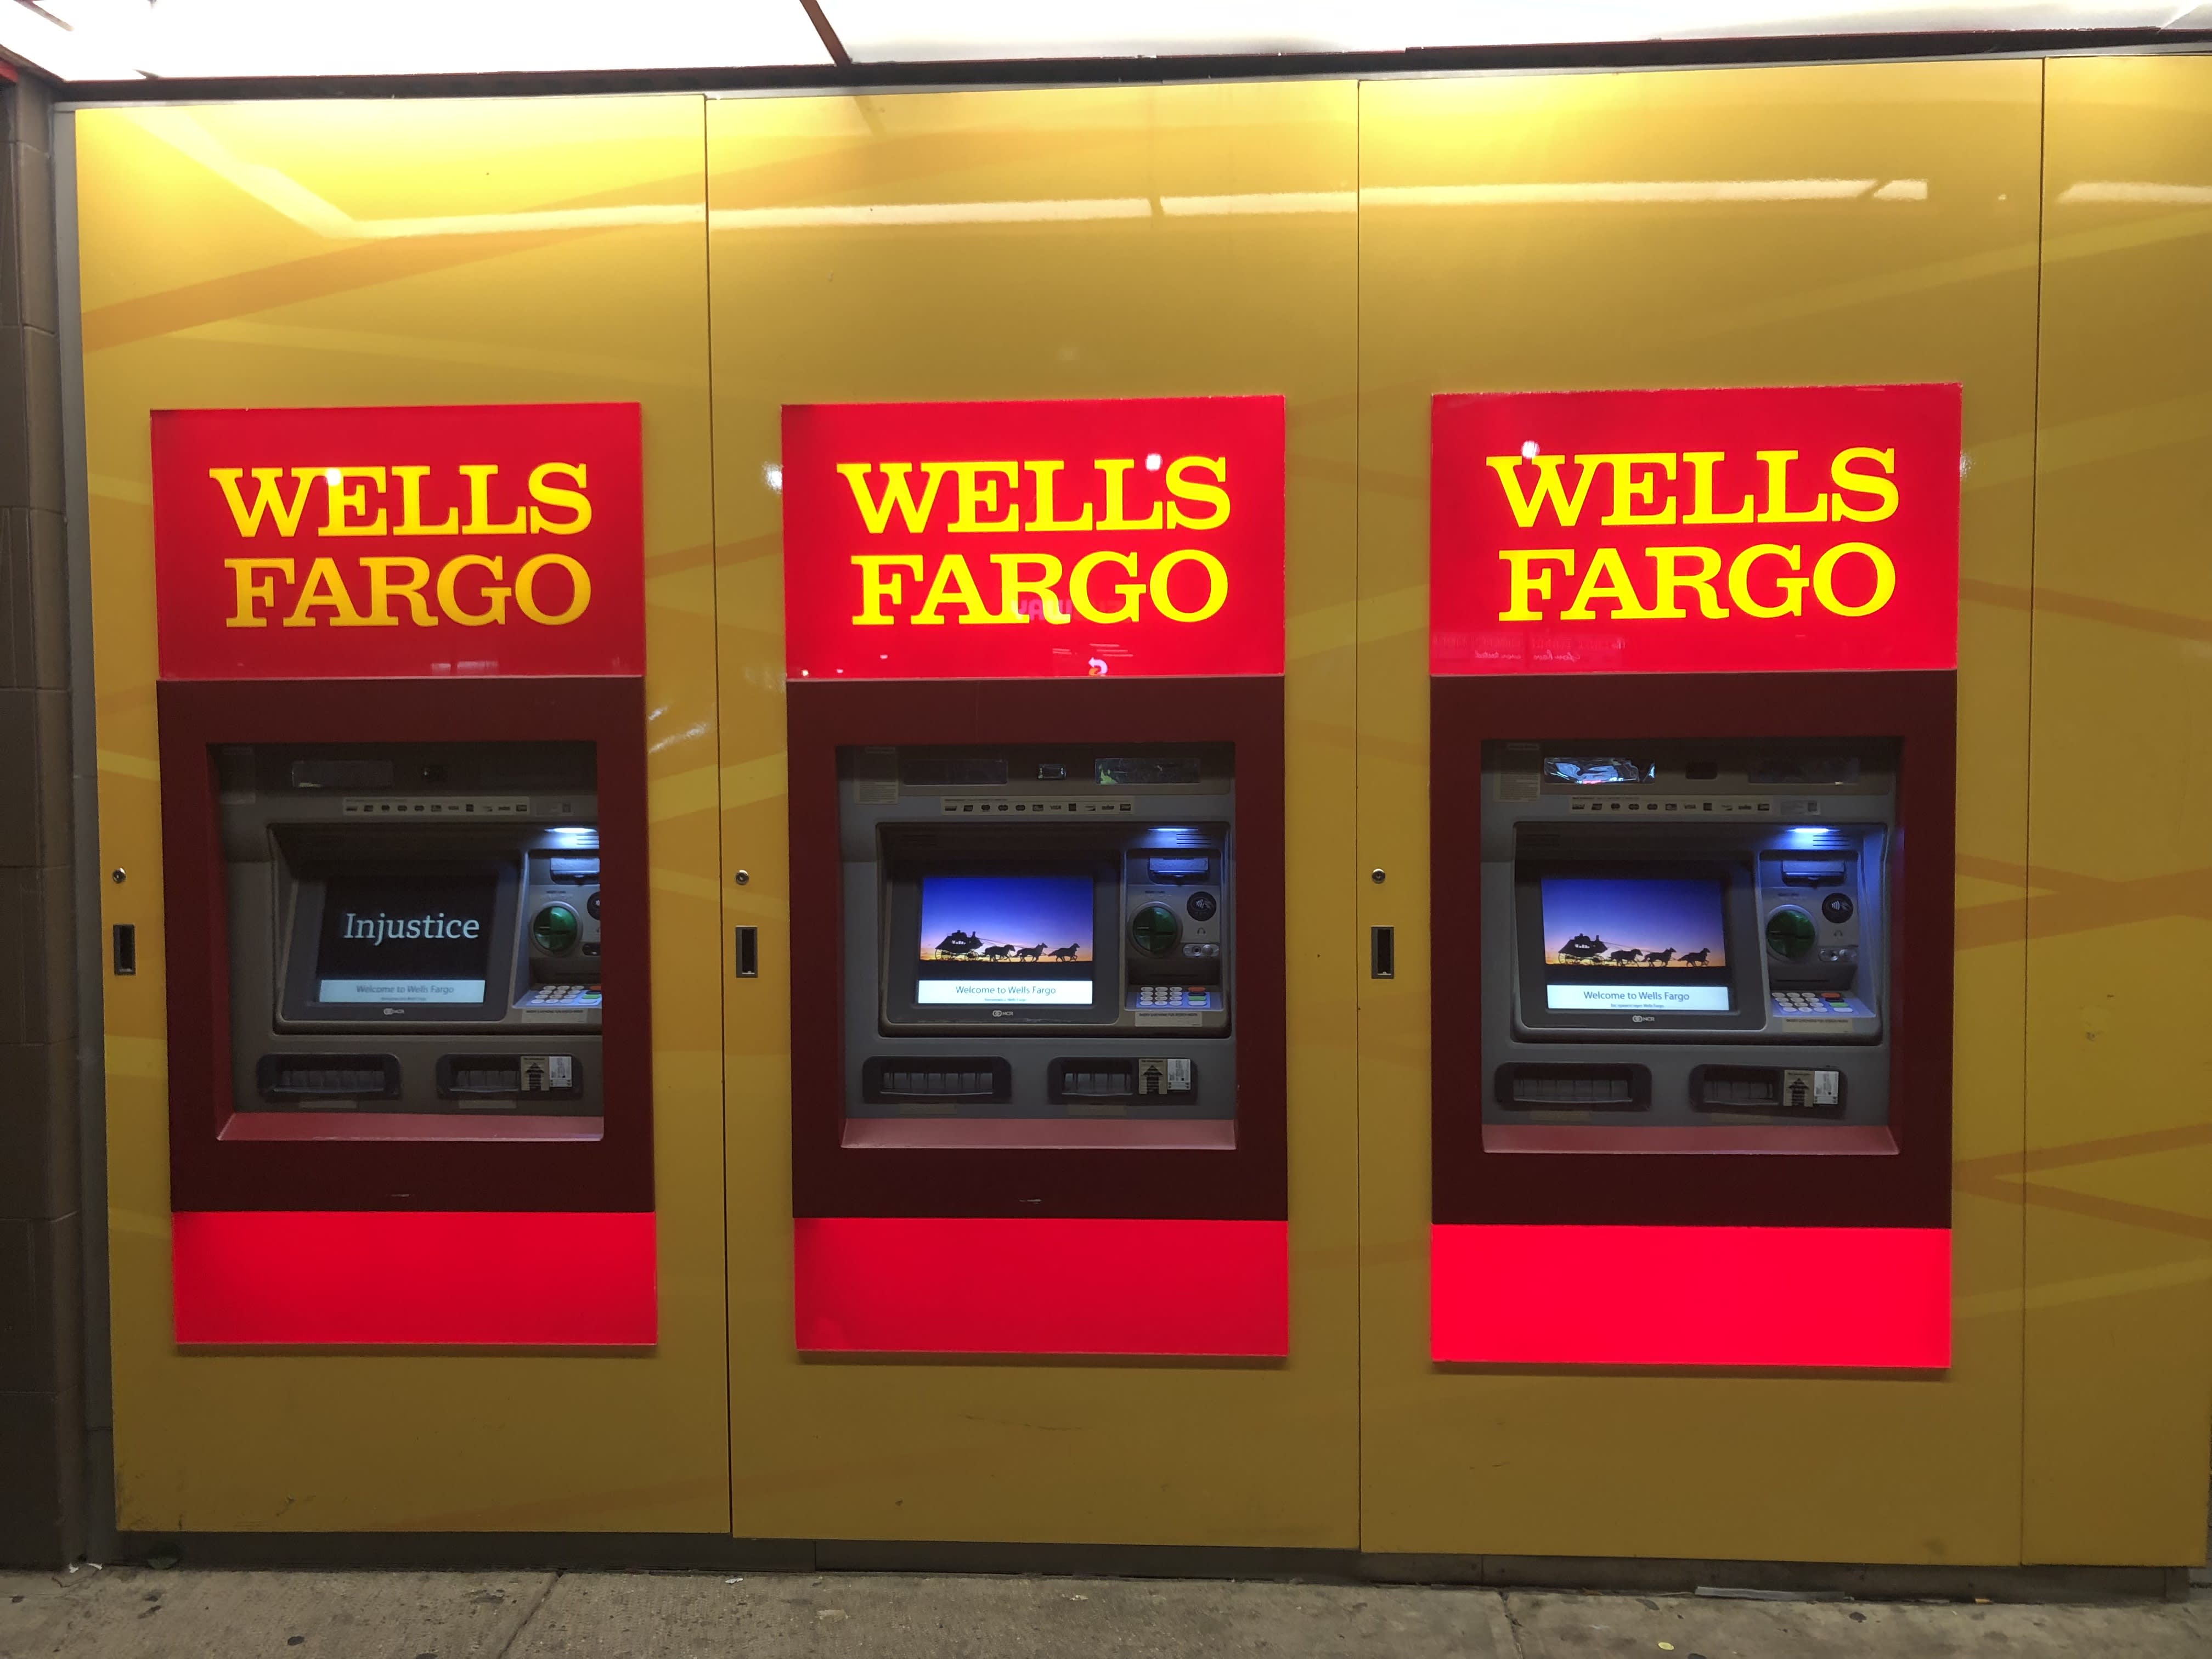 Wells Fargo posts higher fourth-quarter profit, helped by higher interest rates and cost cutting